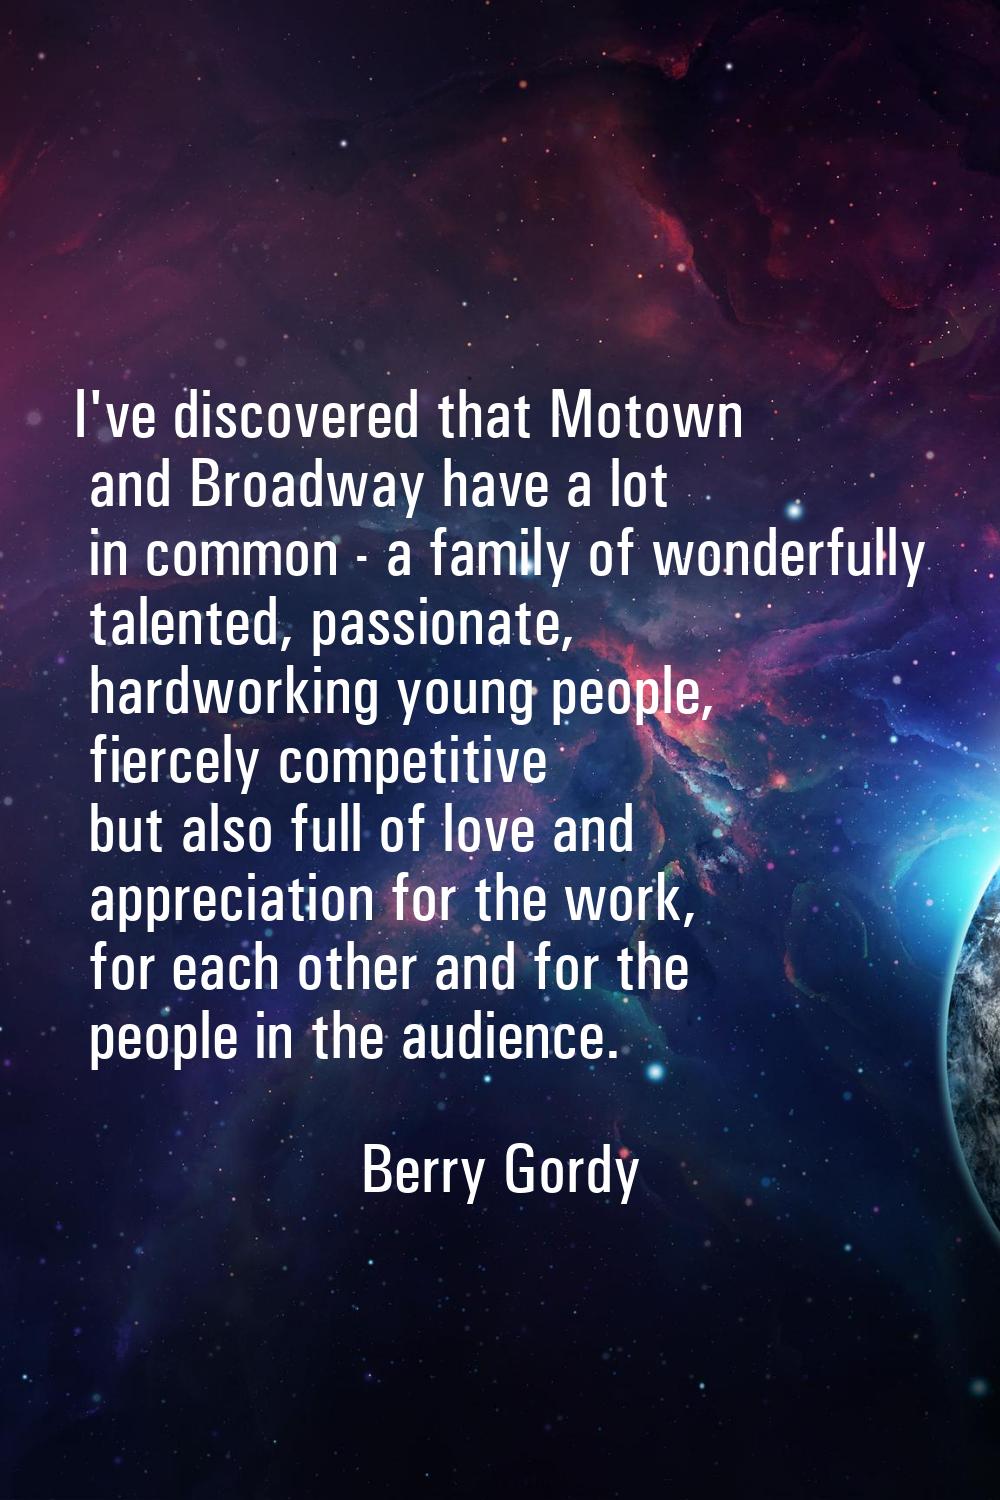 I've discovered that Motown and Broadway have a lot in common - a family of wonderfully talented, p